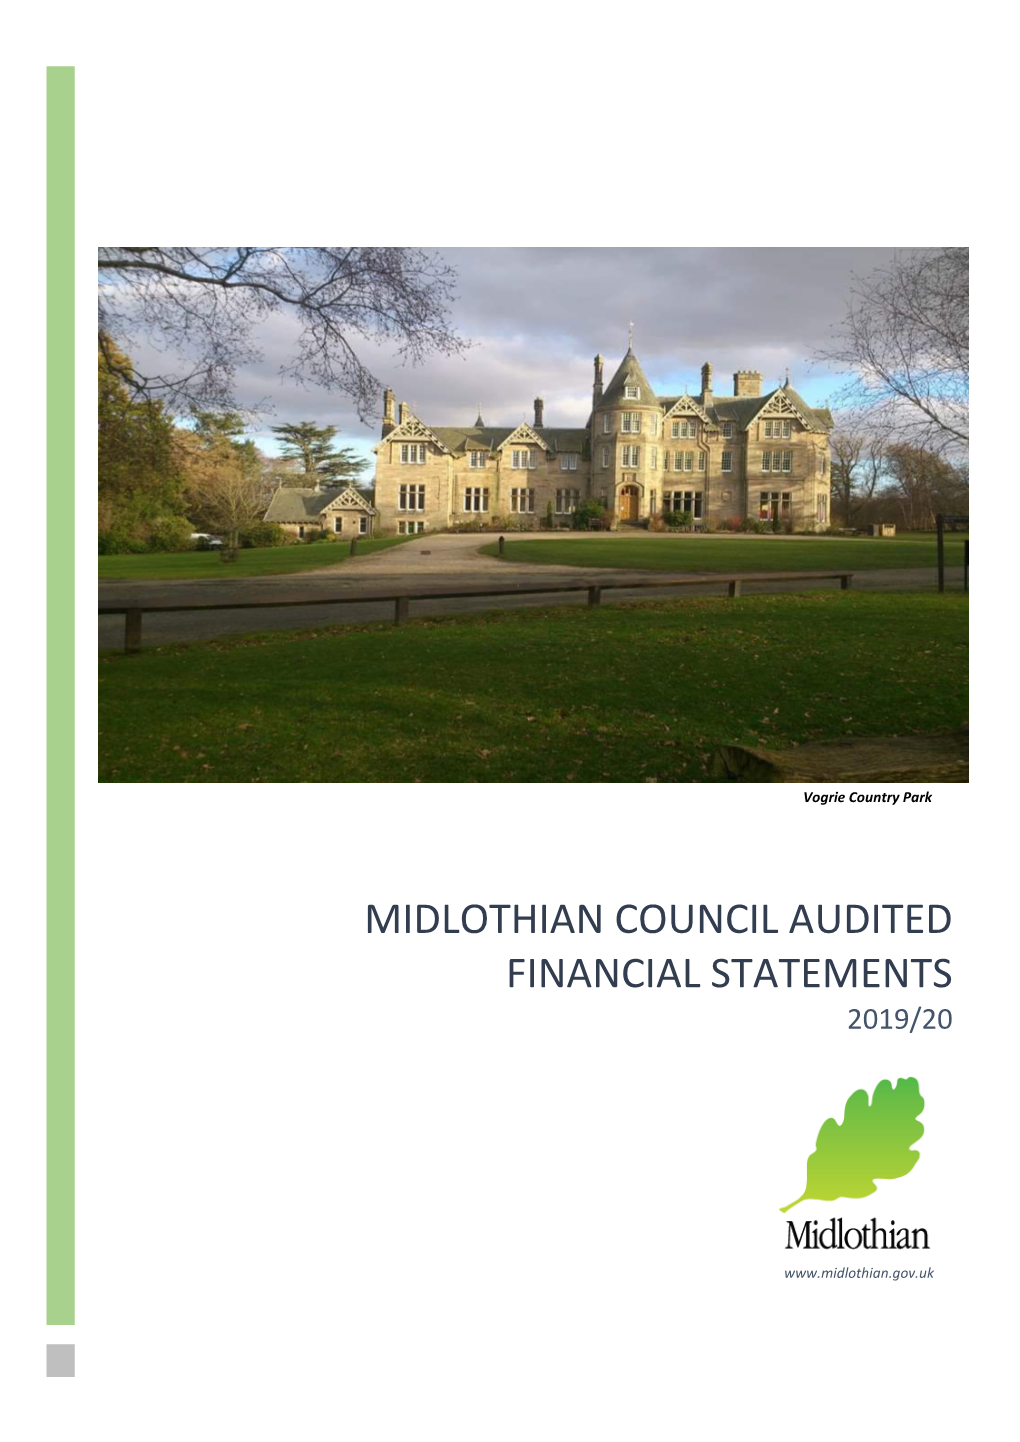 Midlothian Council Audited Financial Statements 2019/20